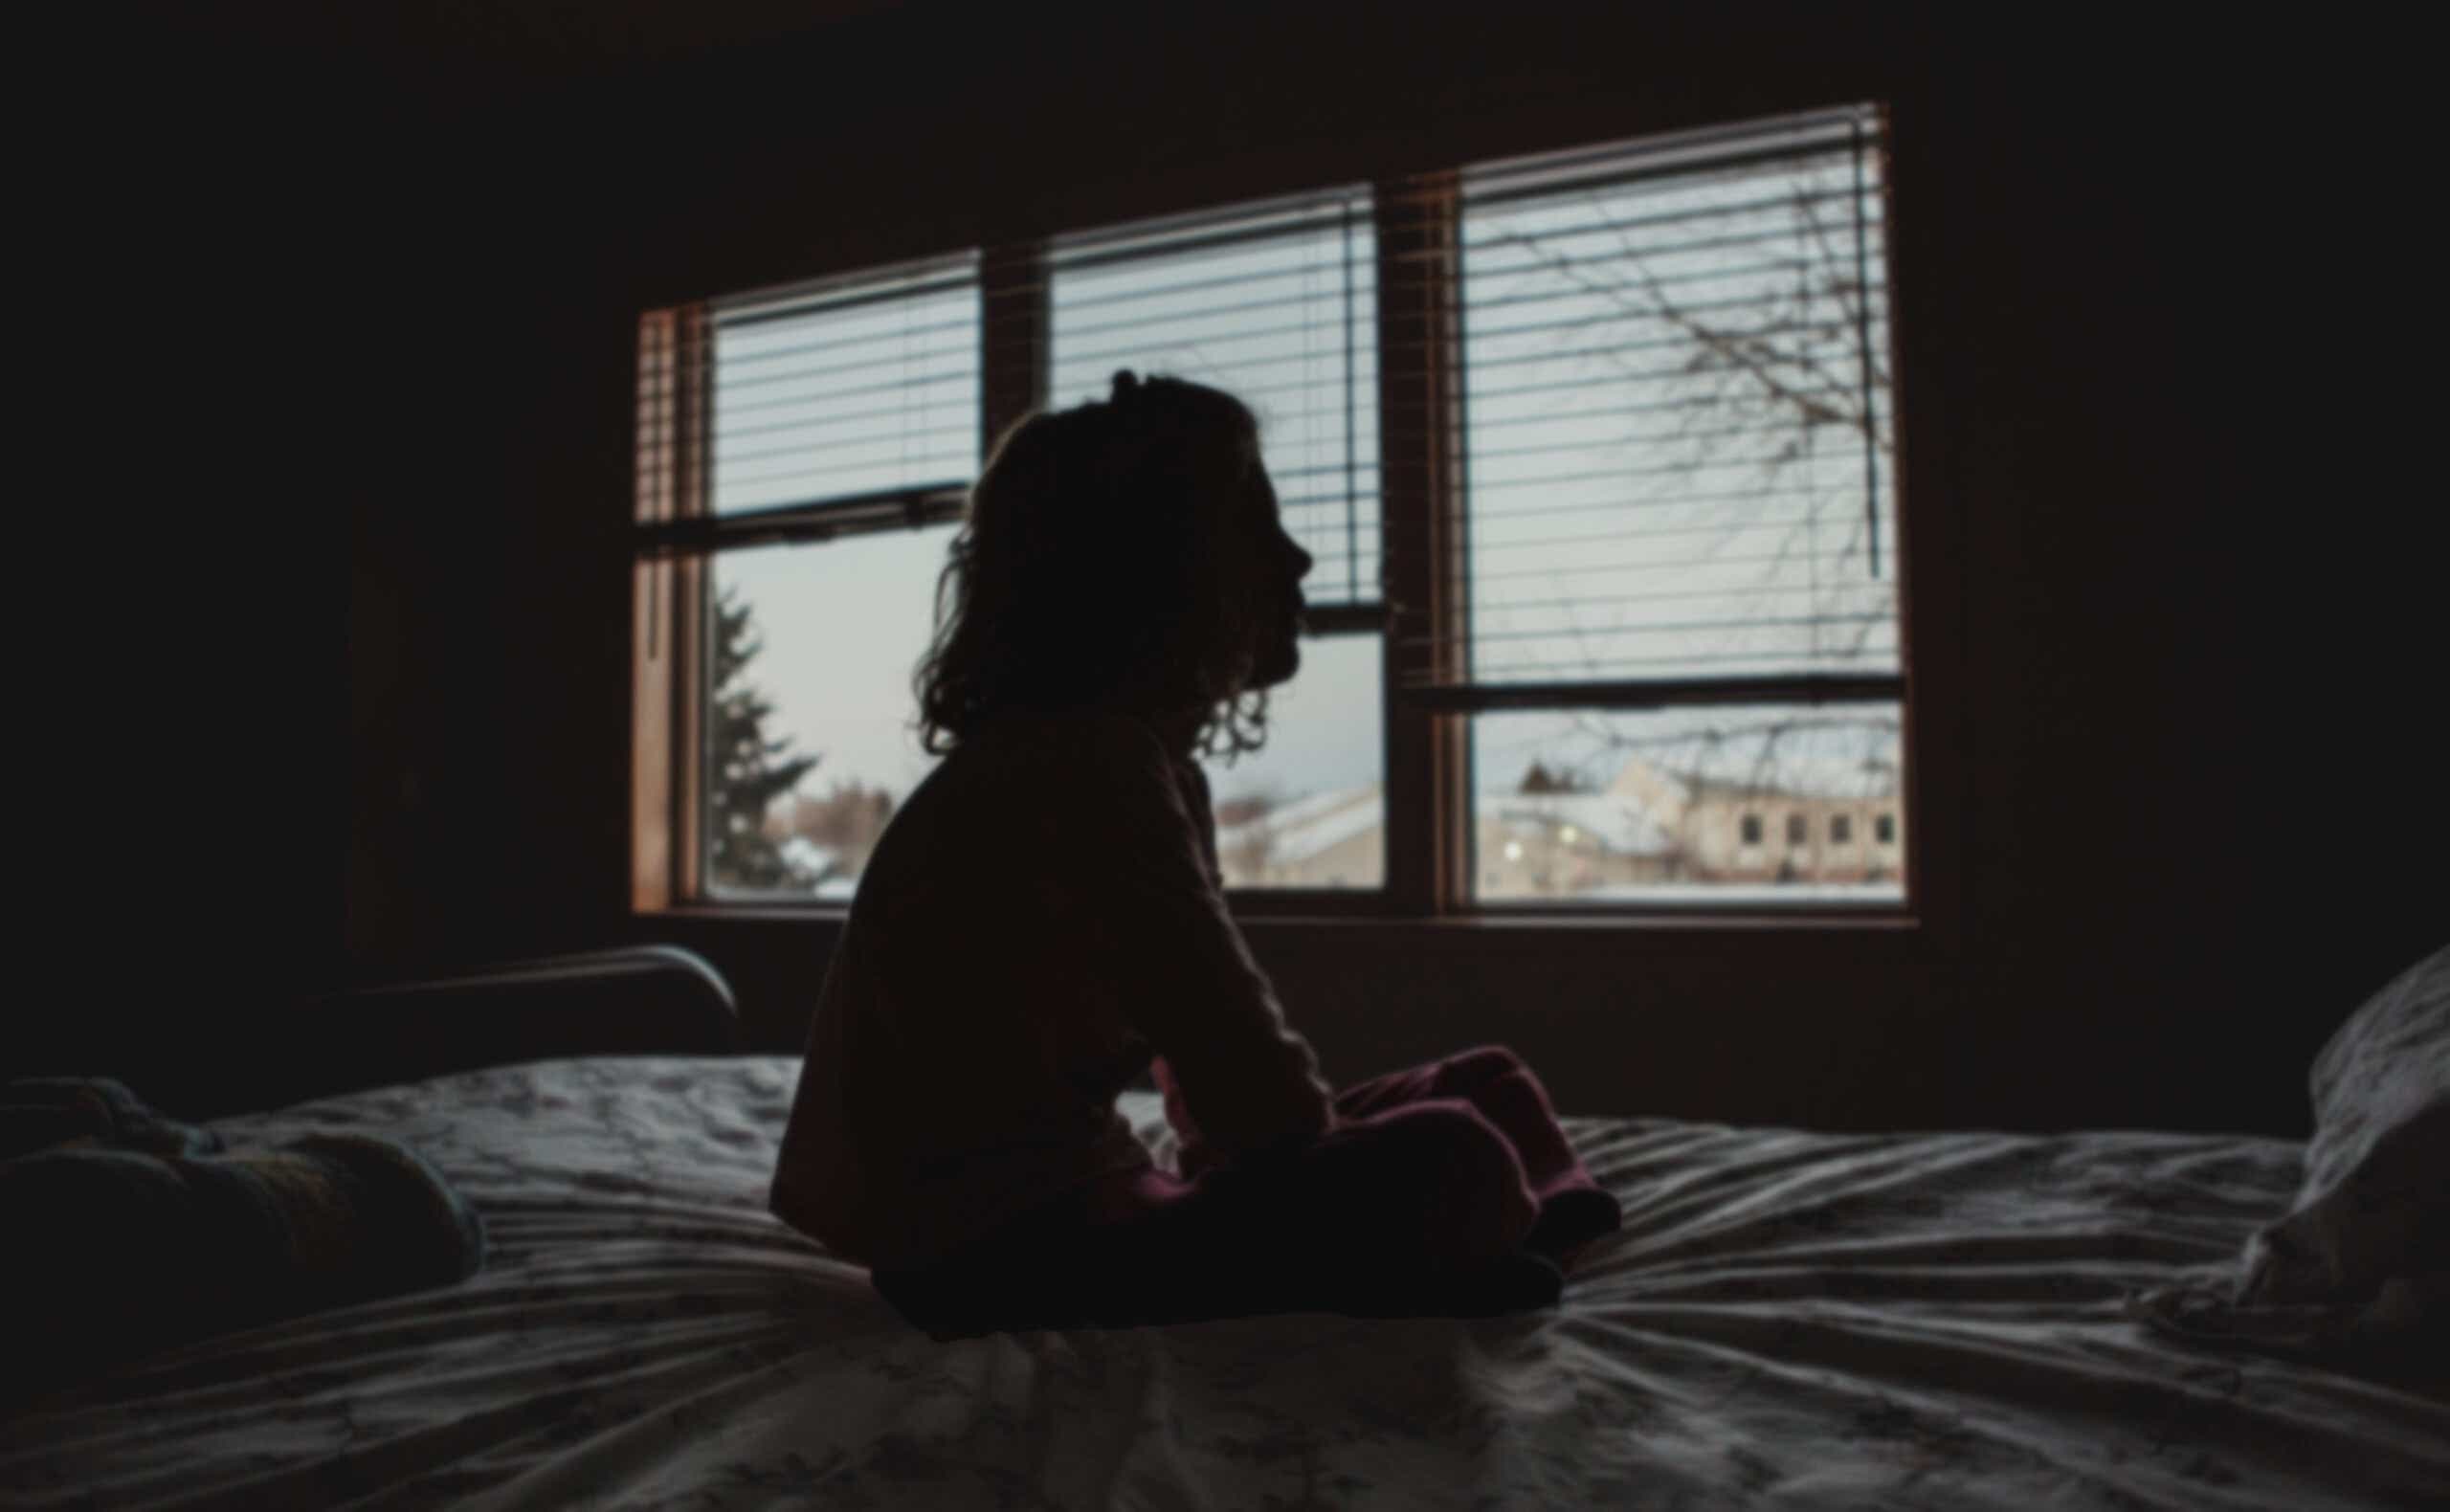 Silhouette of a young girl sitting in a bedroom